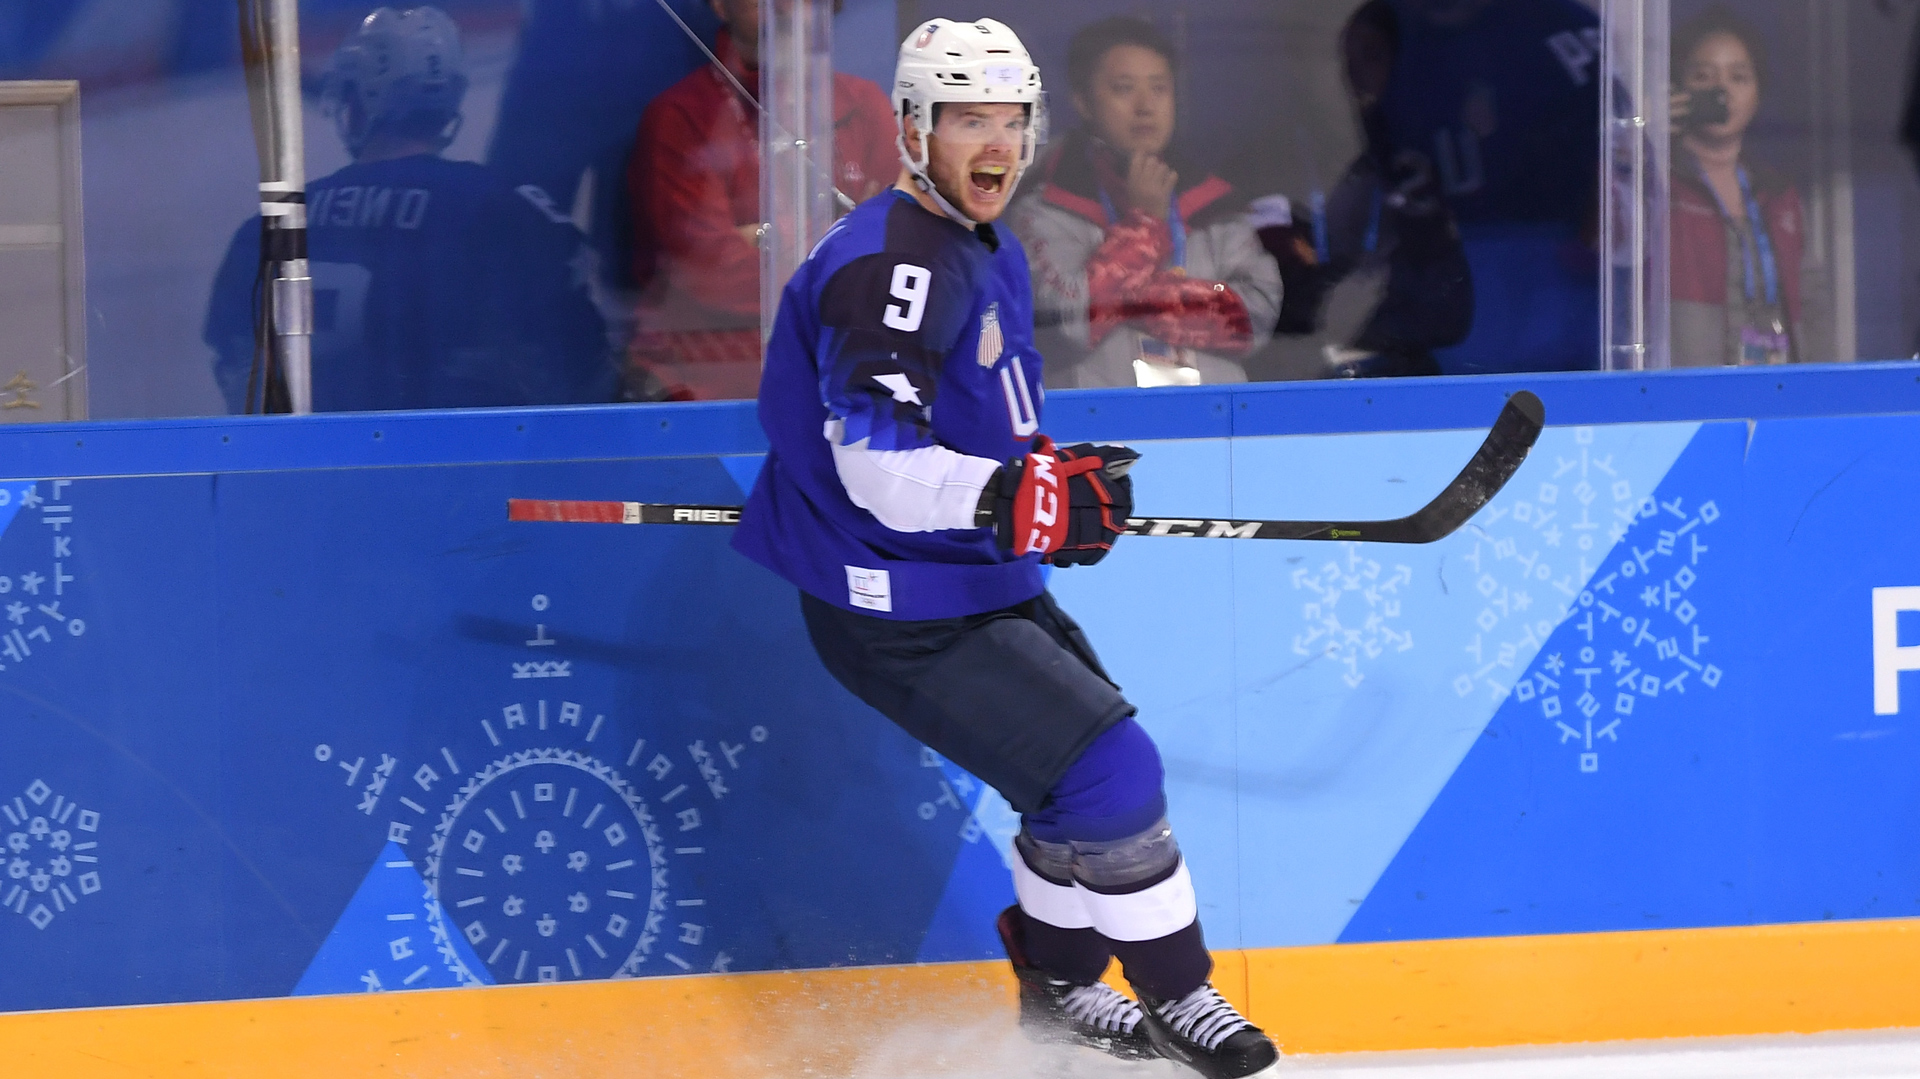 Heres How to Watch Mens Ice Hockey At the Winter Olympics